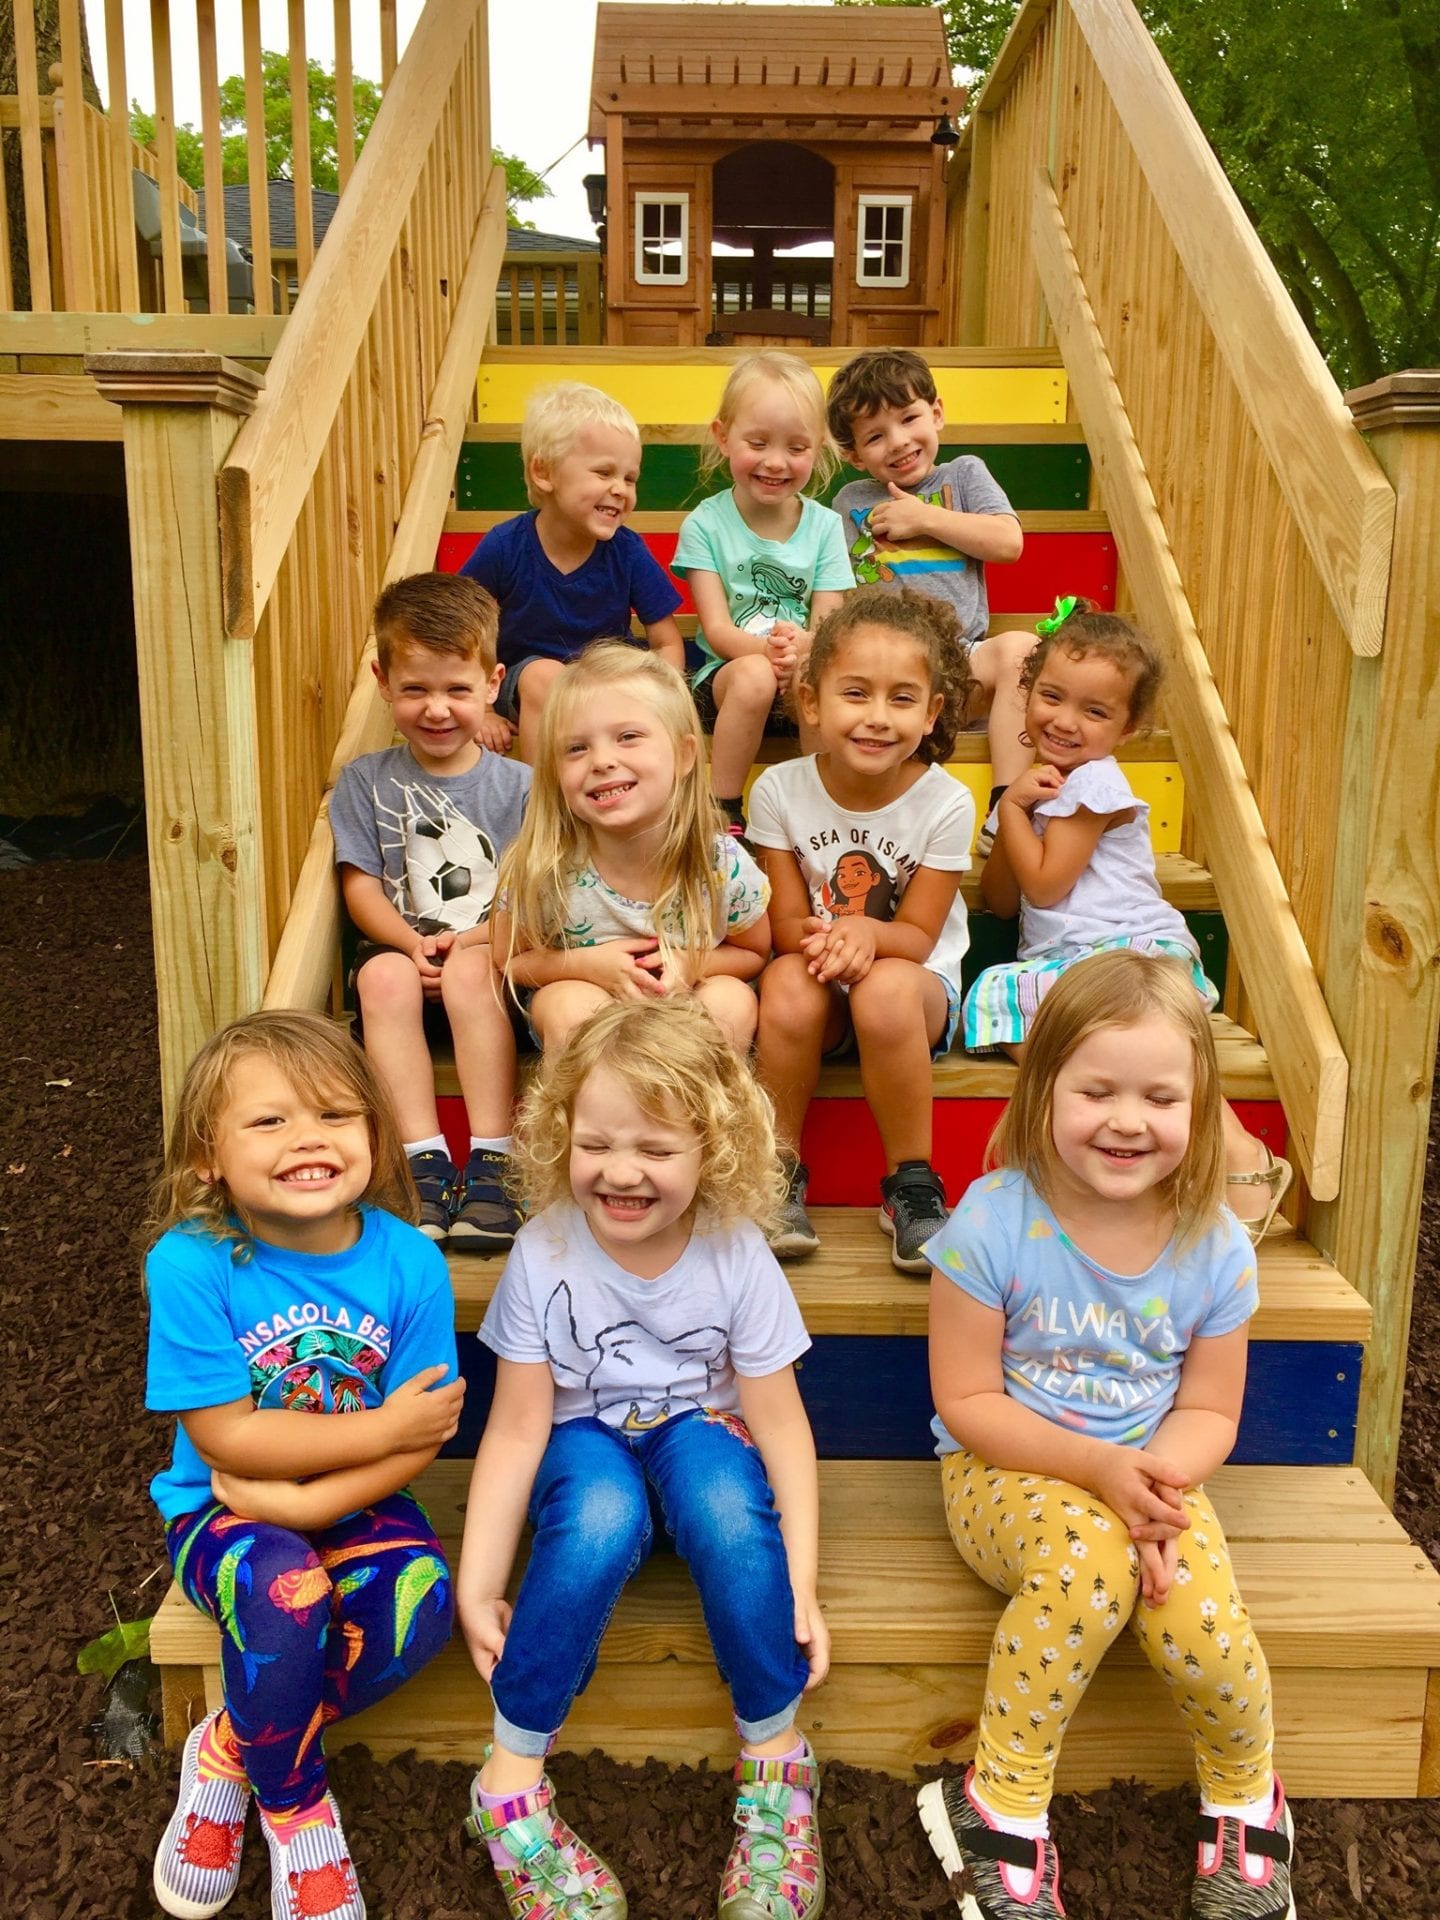 Ten kids sitting on the wooden stairs smiling at the camera